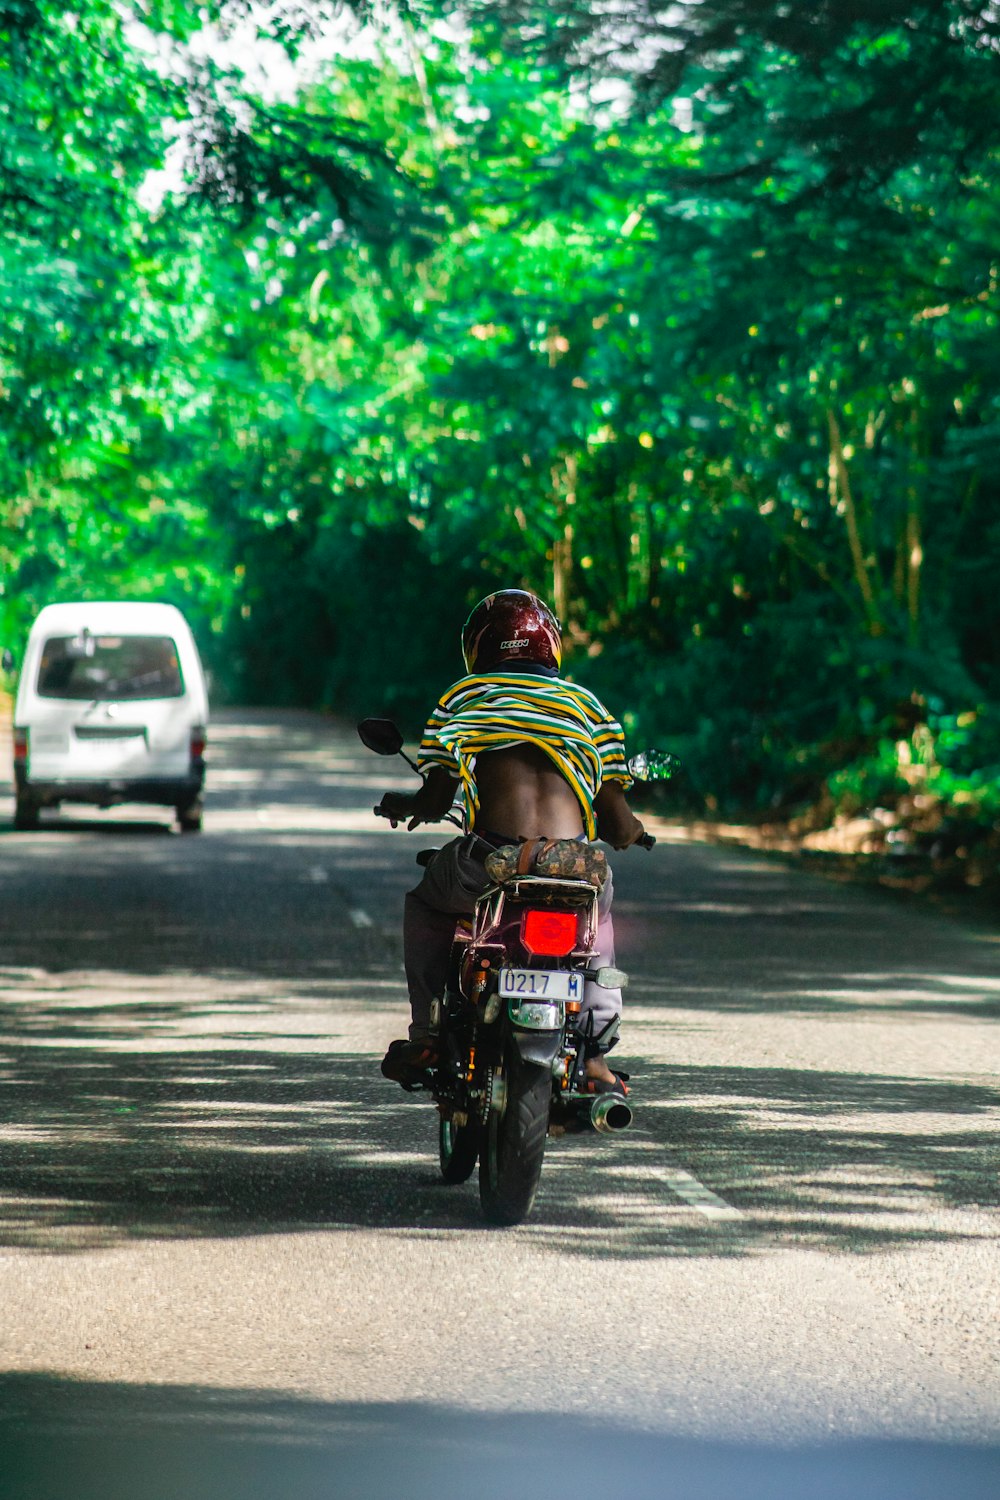 man in green and yellow shirt riding motorcycle on road during daytime